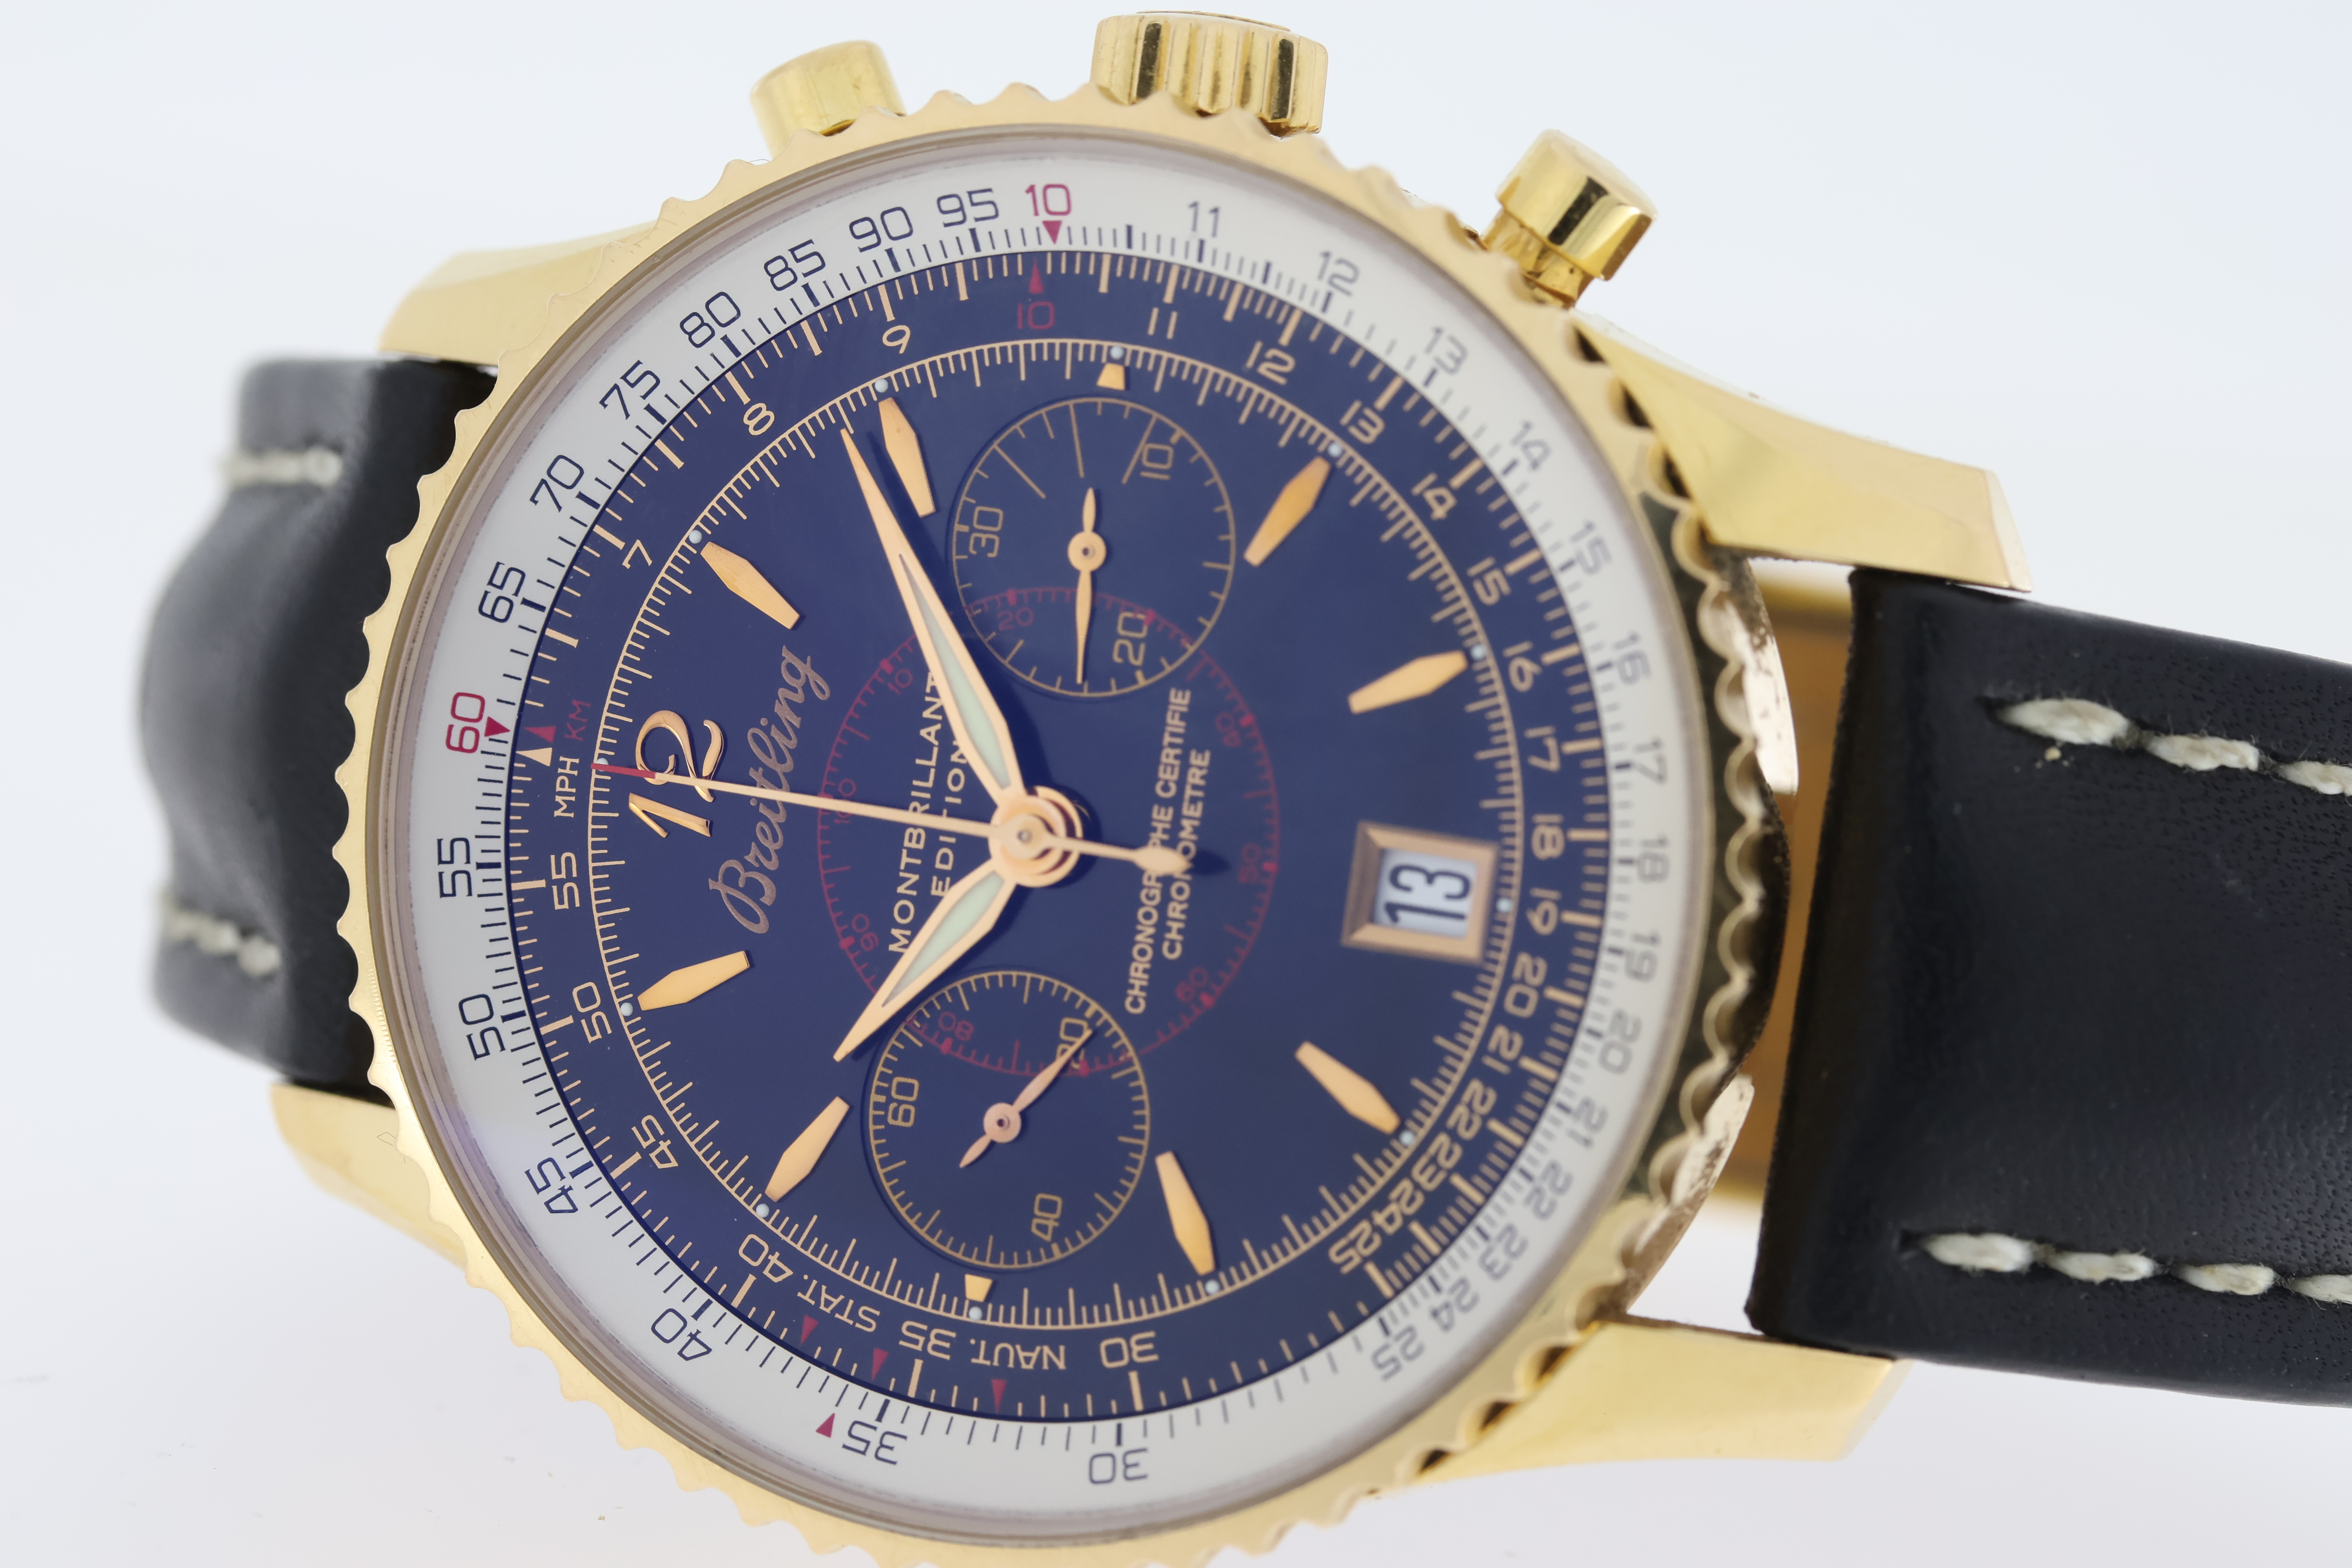 Breitling Montbrilliant Limited Edition 18ct Yellow Gold Chronograph Manual Wind with Box - Image 6 of 7